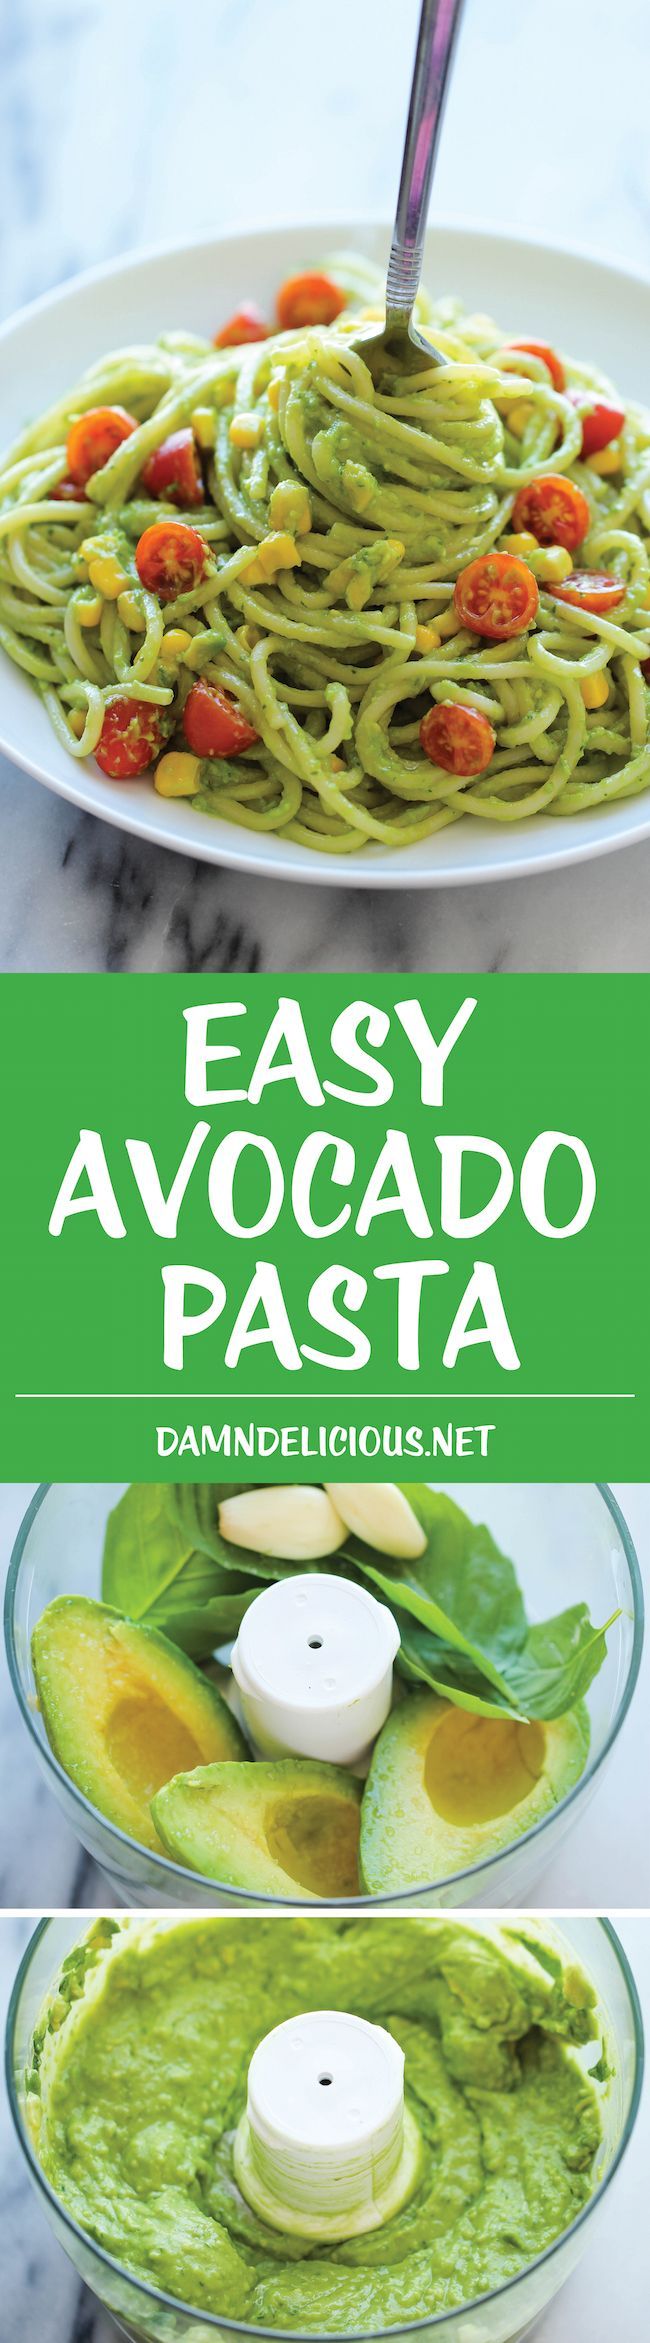 Avocado Pasta – The easiest, most unbelievably creamy avocado pasta. And it’ll be on your dinner table in just 20 min!